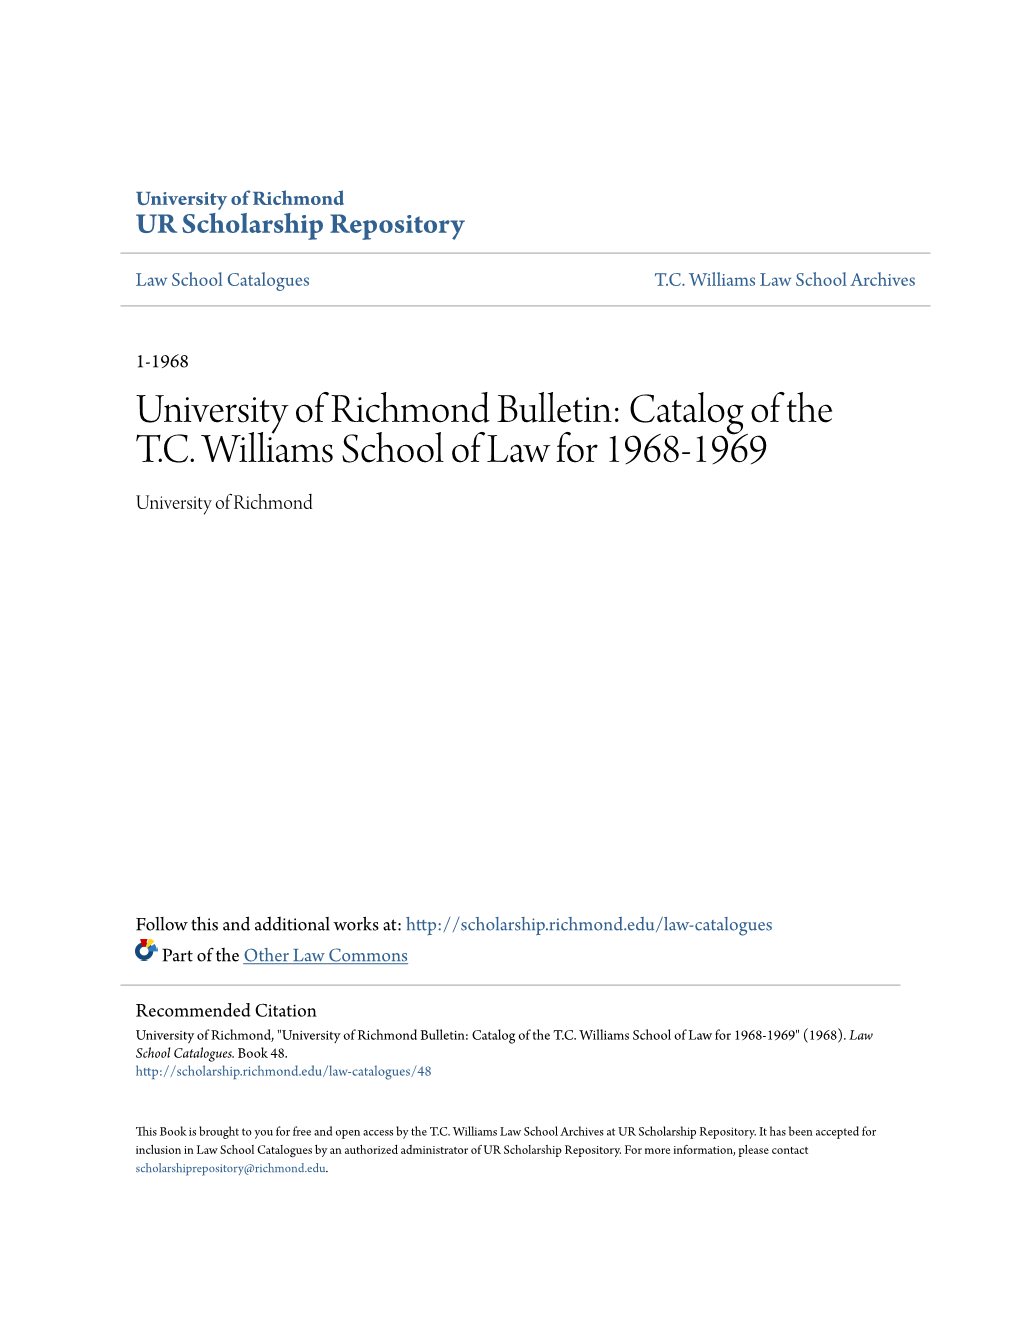 Catalog of the TC Williams School of Law for 1968-1969